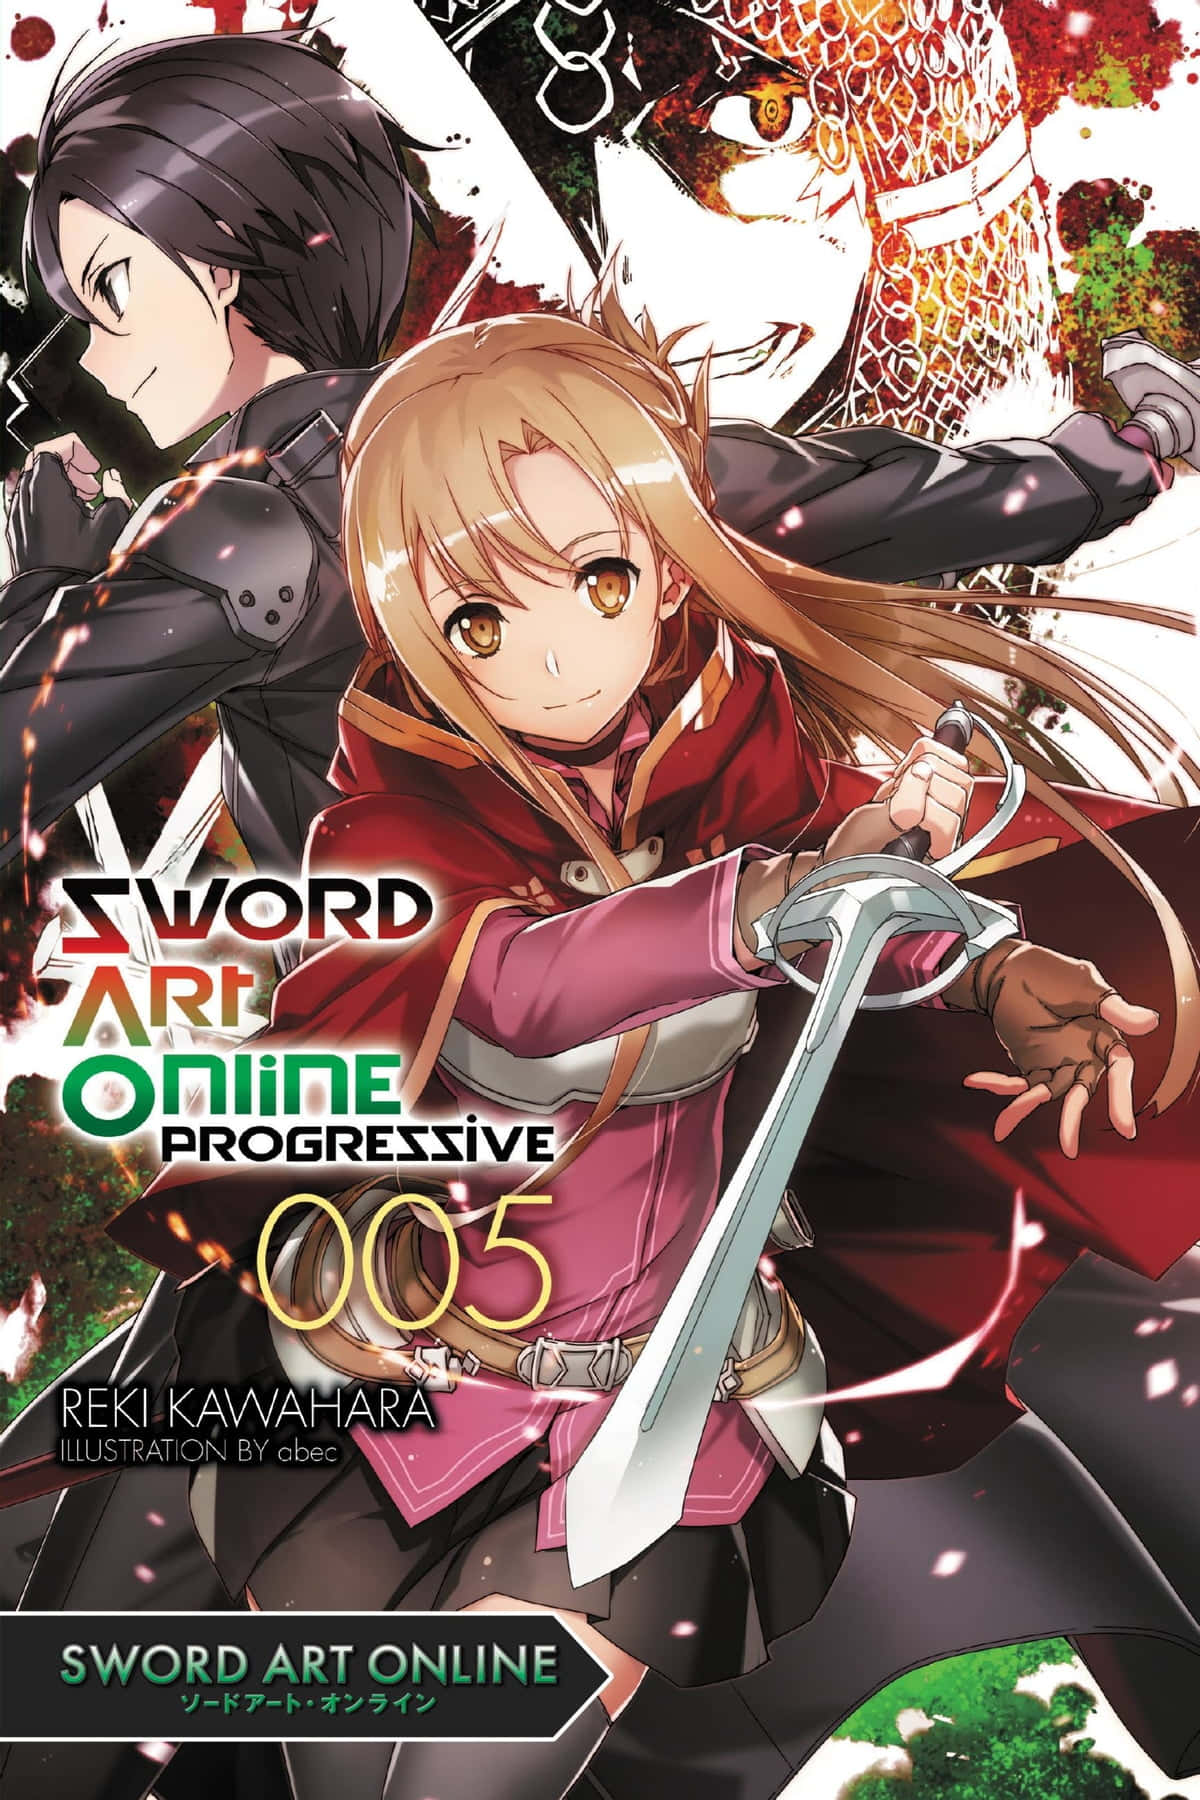 Take Adventure to the Next Level With Sword Art Online